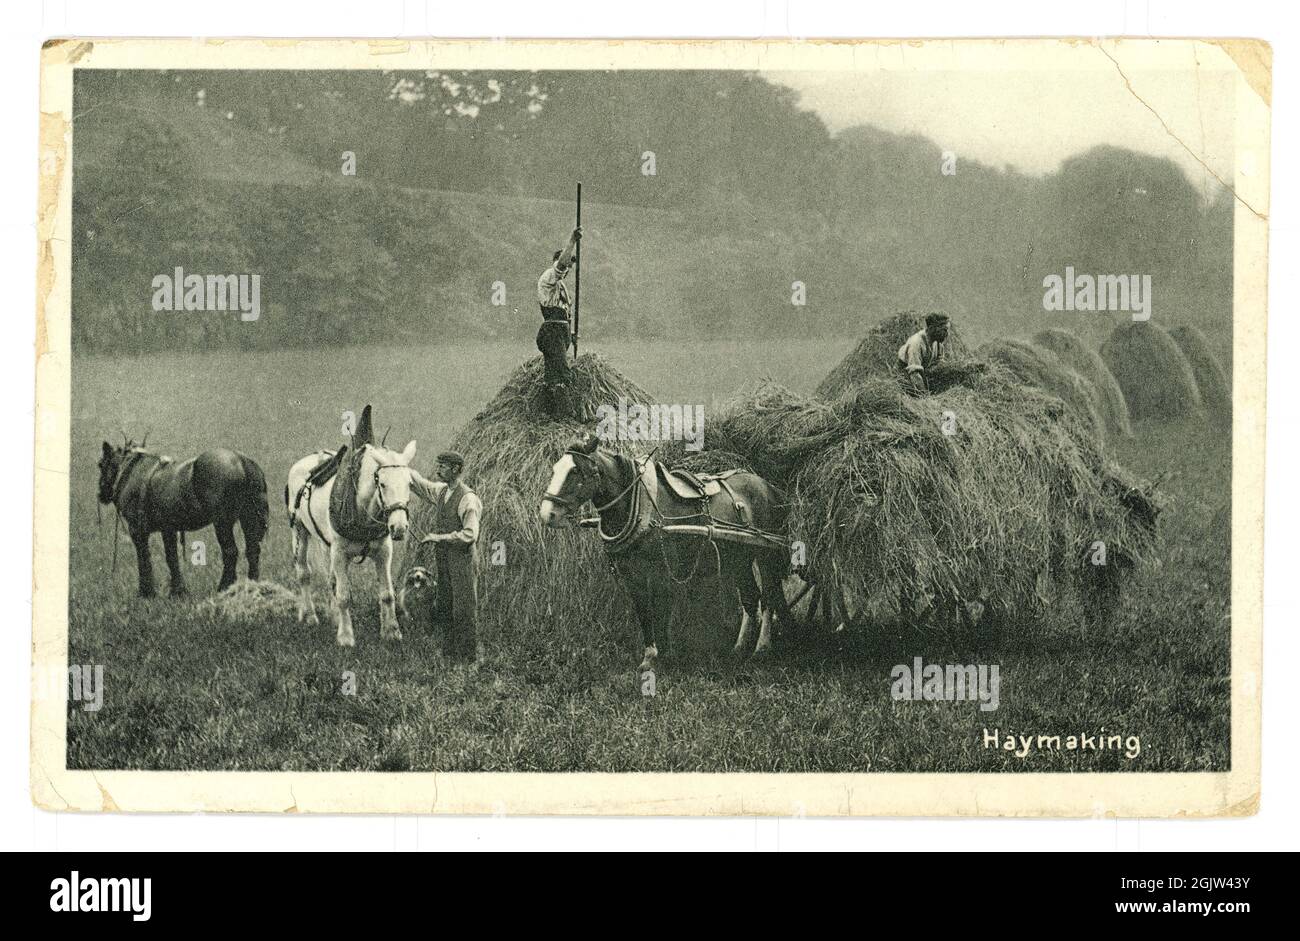 Original charming quaint quaintness Edwardian era, early 1900's greetings postcard of haymaking-  a rural idyll, posted from village of Kilham, East Riding of Yorkshire, U.K. Dated May 1907 Stock Photo